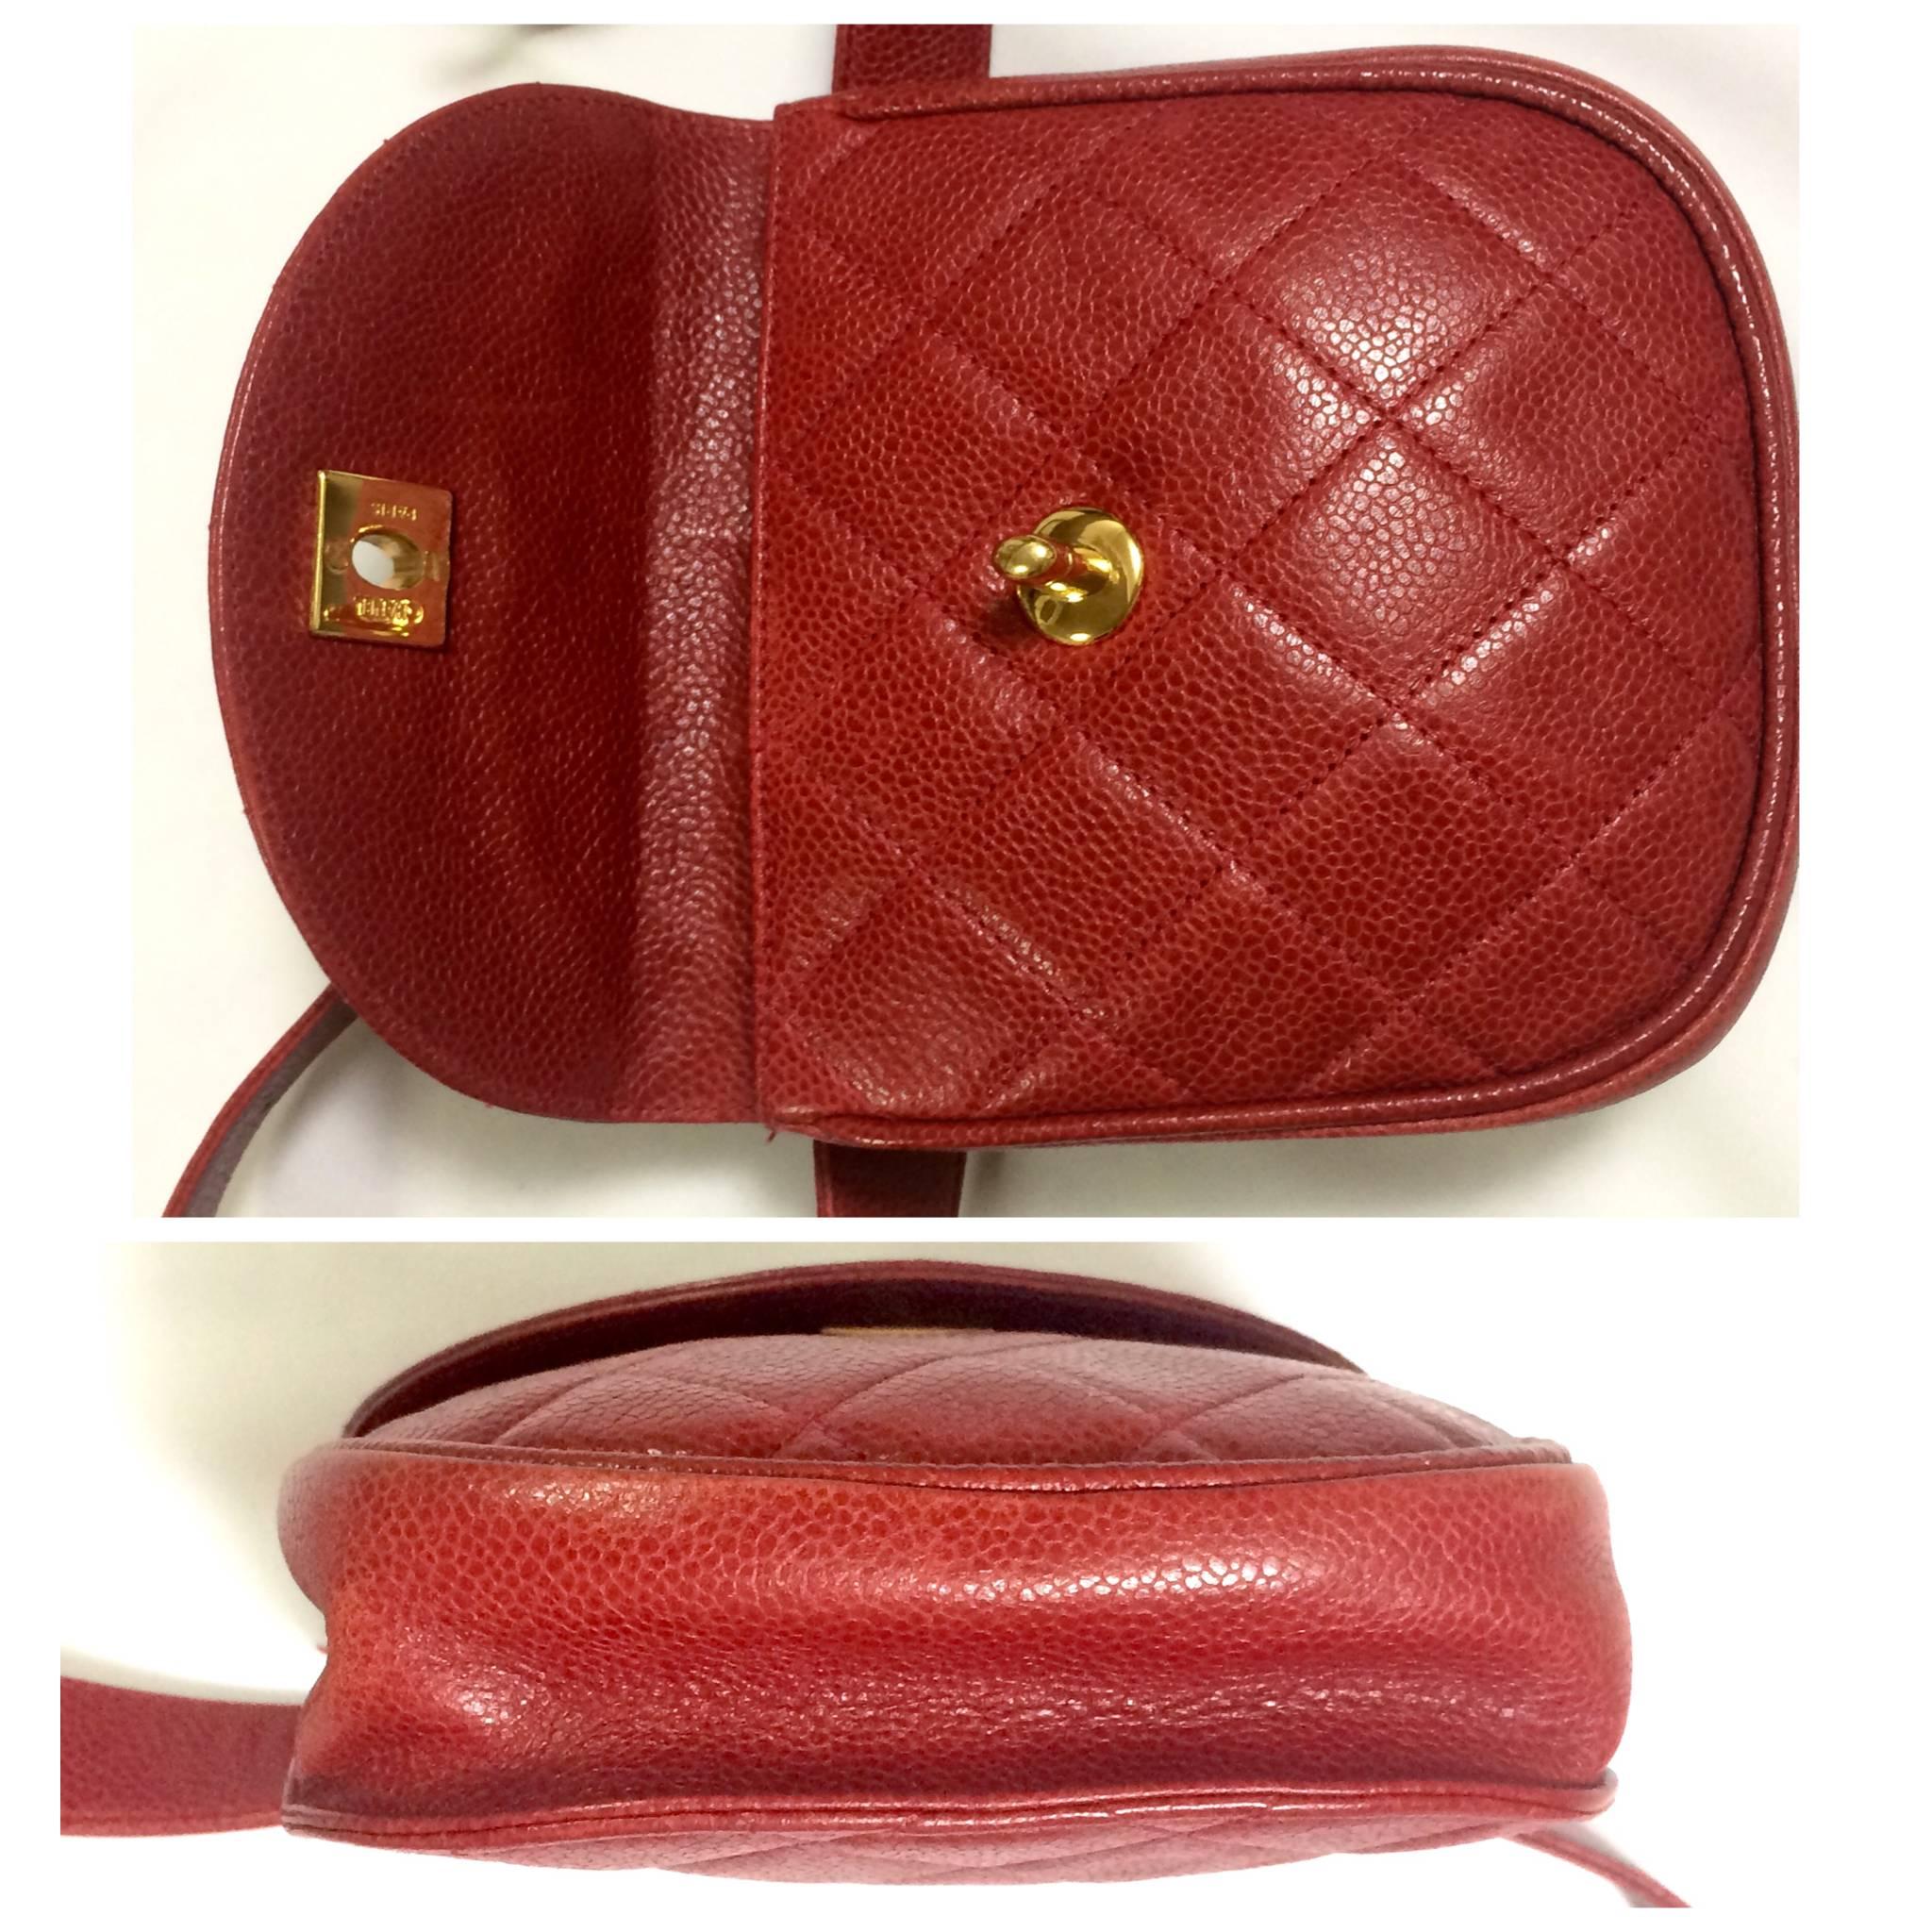 Vintage CHANEL 2.55 red caviar leather waist purse, fanny pack with golden cc. 2